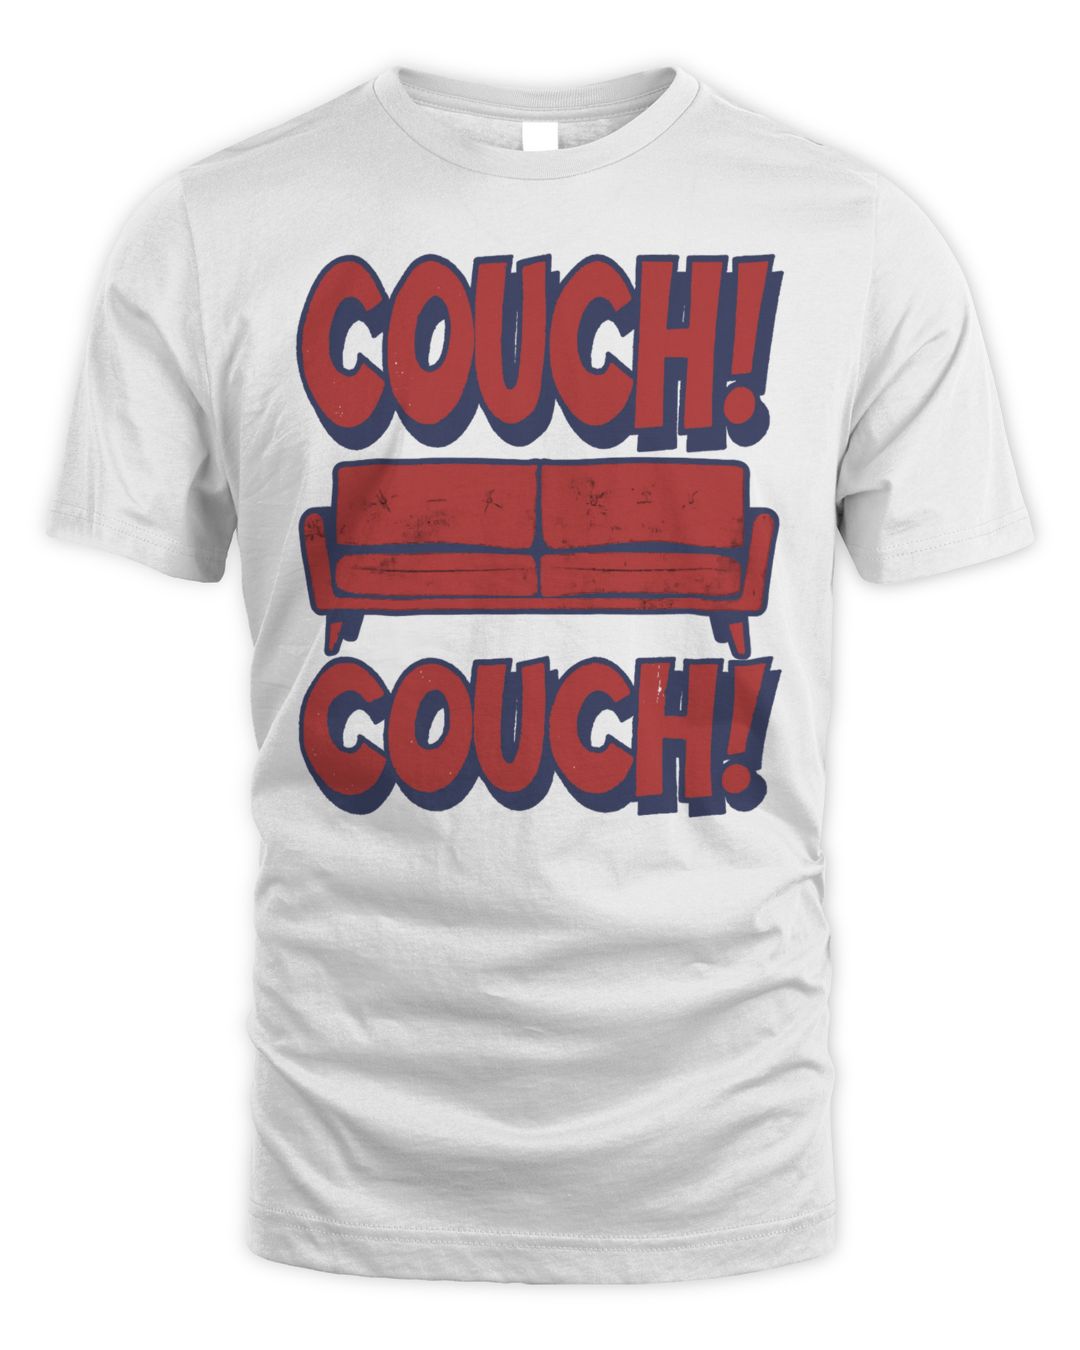 Popcorned Planet Merch Couch Couch Couch Shirt